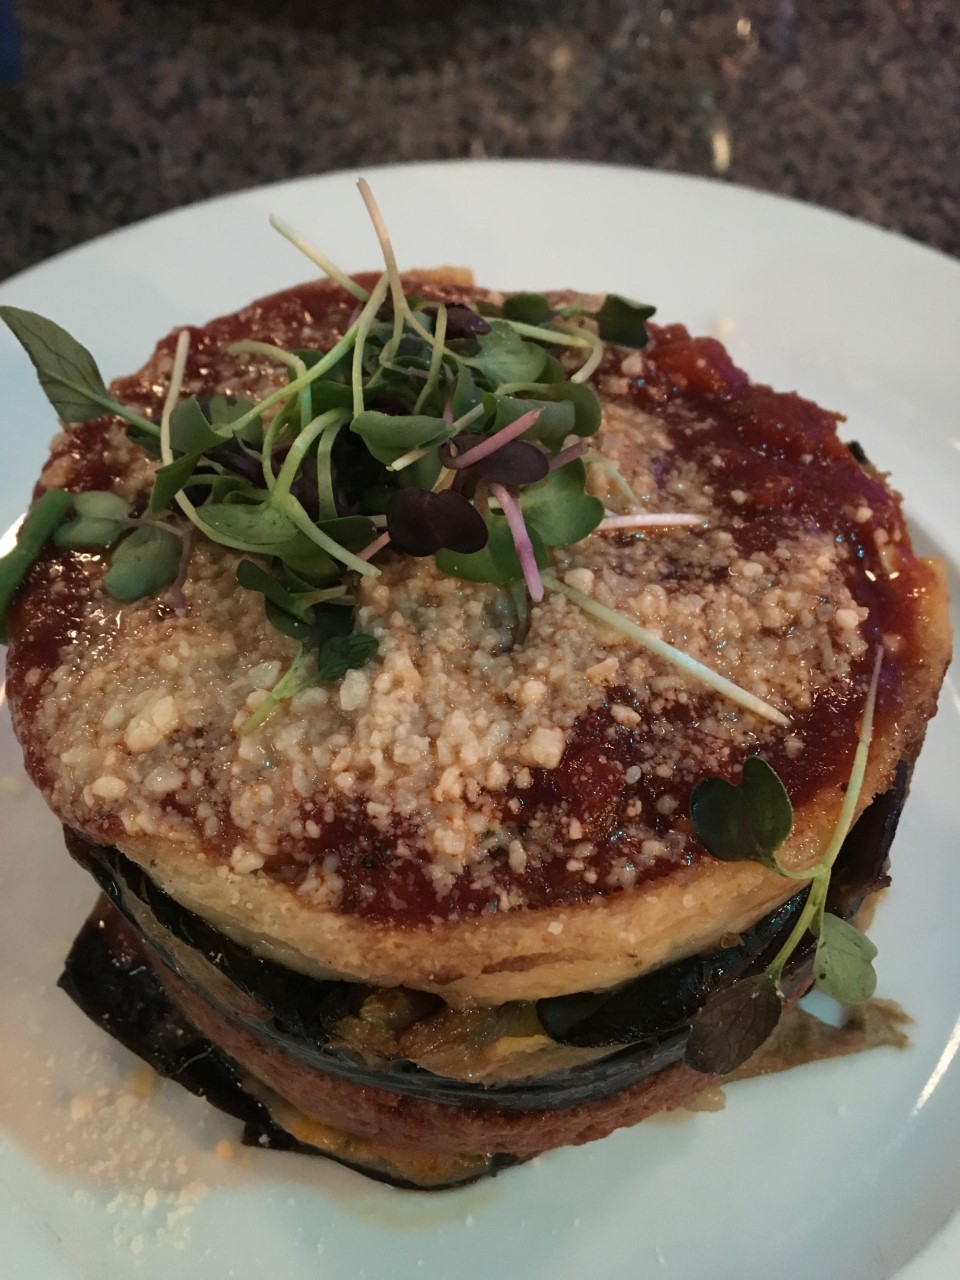 Layers of eggplant, meat sauce, and cheese topped with béchamel and a sprig of greens for garnish